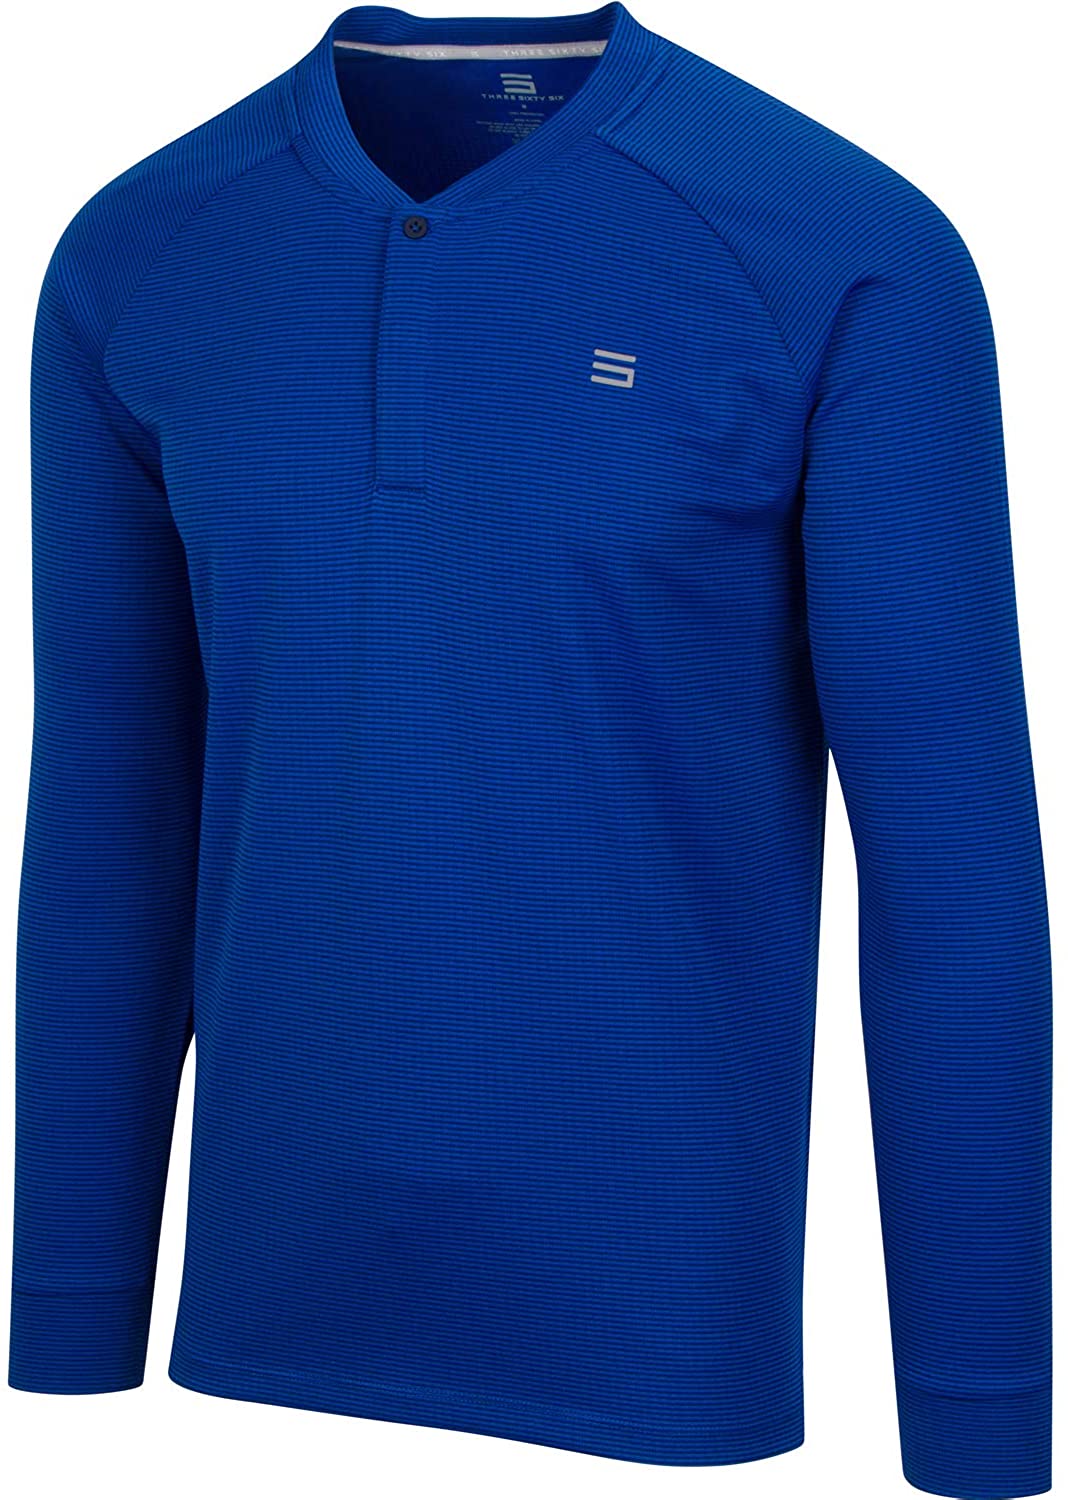 Dry Fit Long Sleeve Collarless Golf Shirts for Men - 4, Royal Blue ...